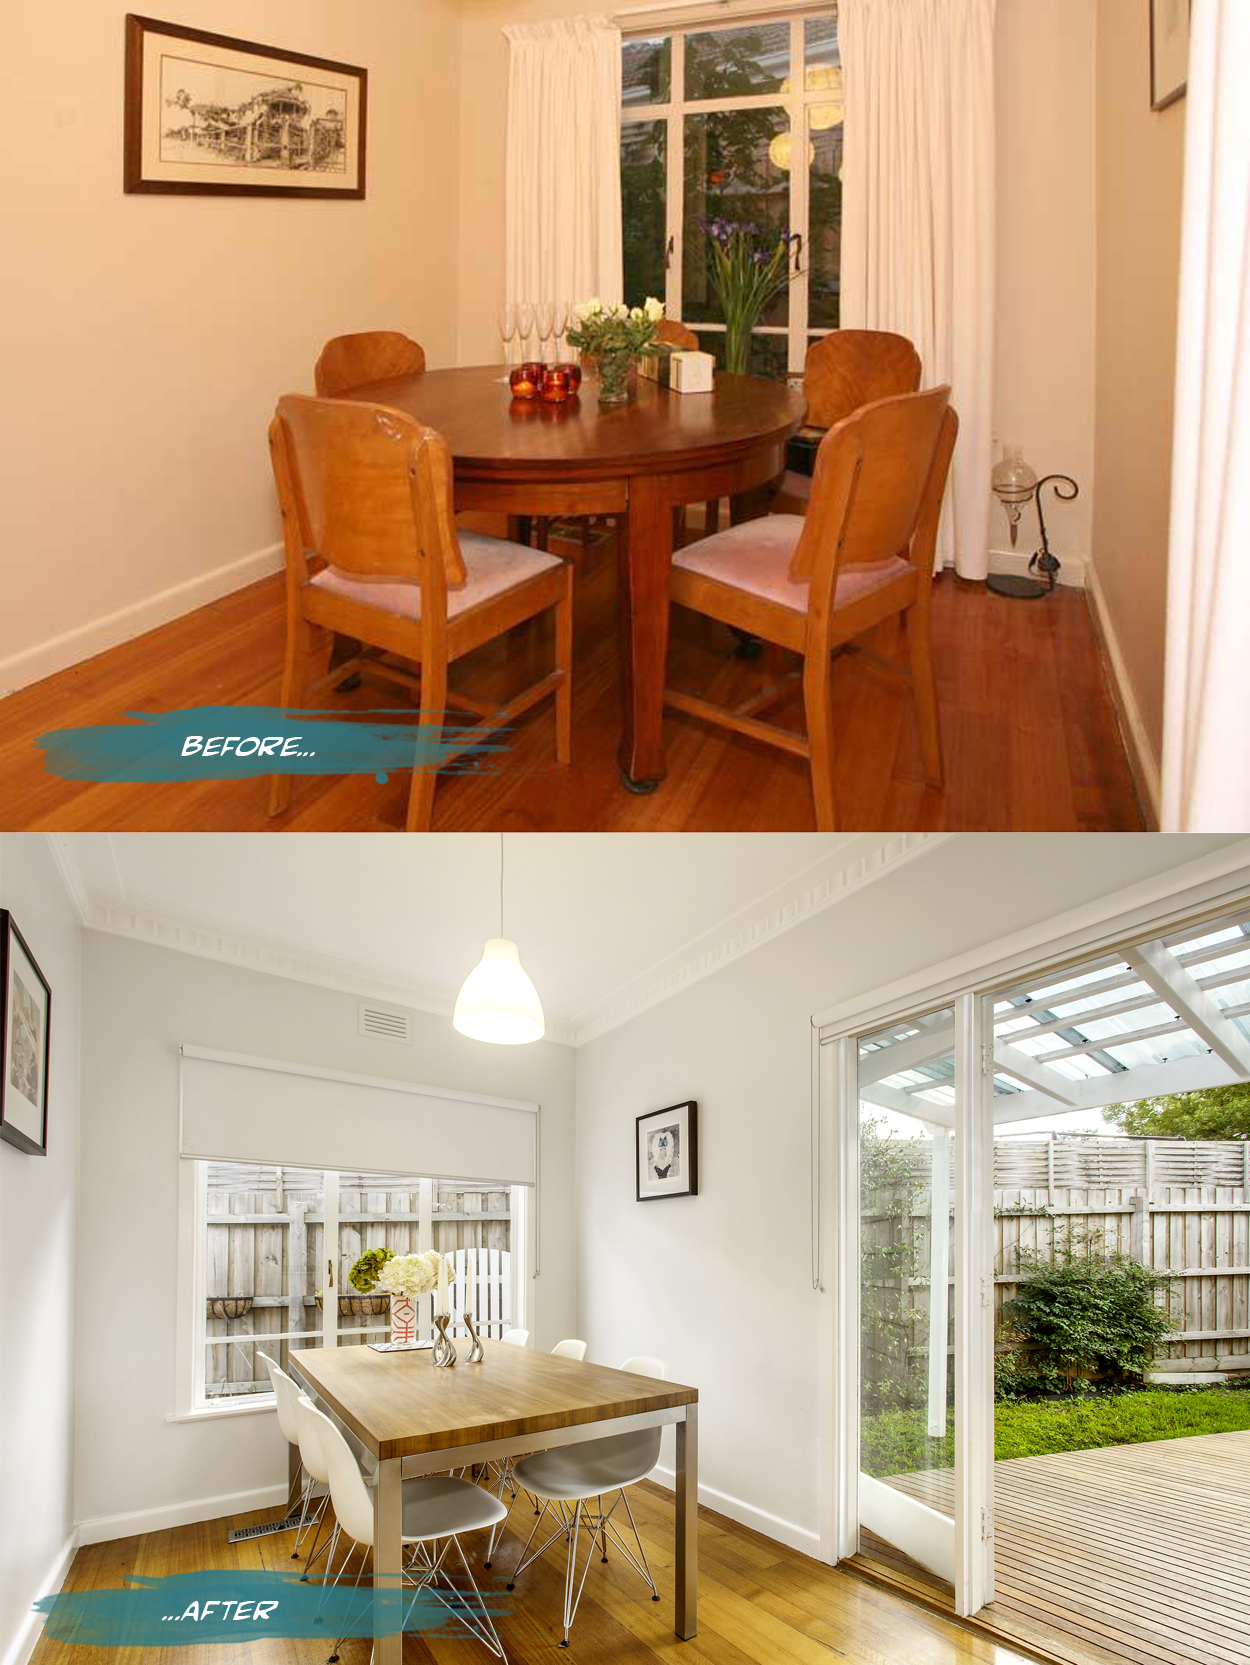 Dining before and after on Romona Sandon Designs blog. #interiors #beforeandafter #styling #home #dining